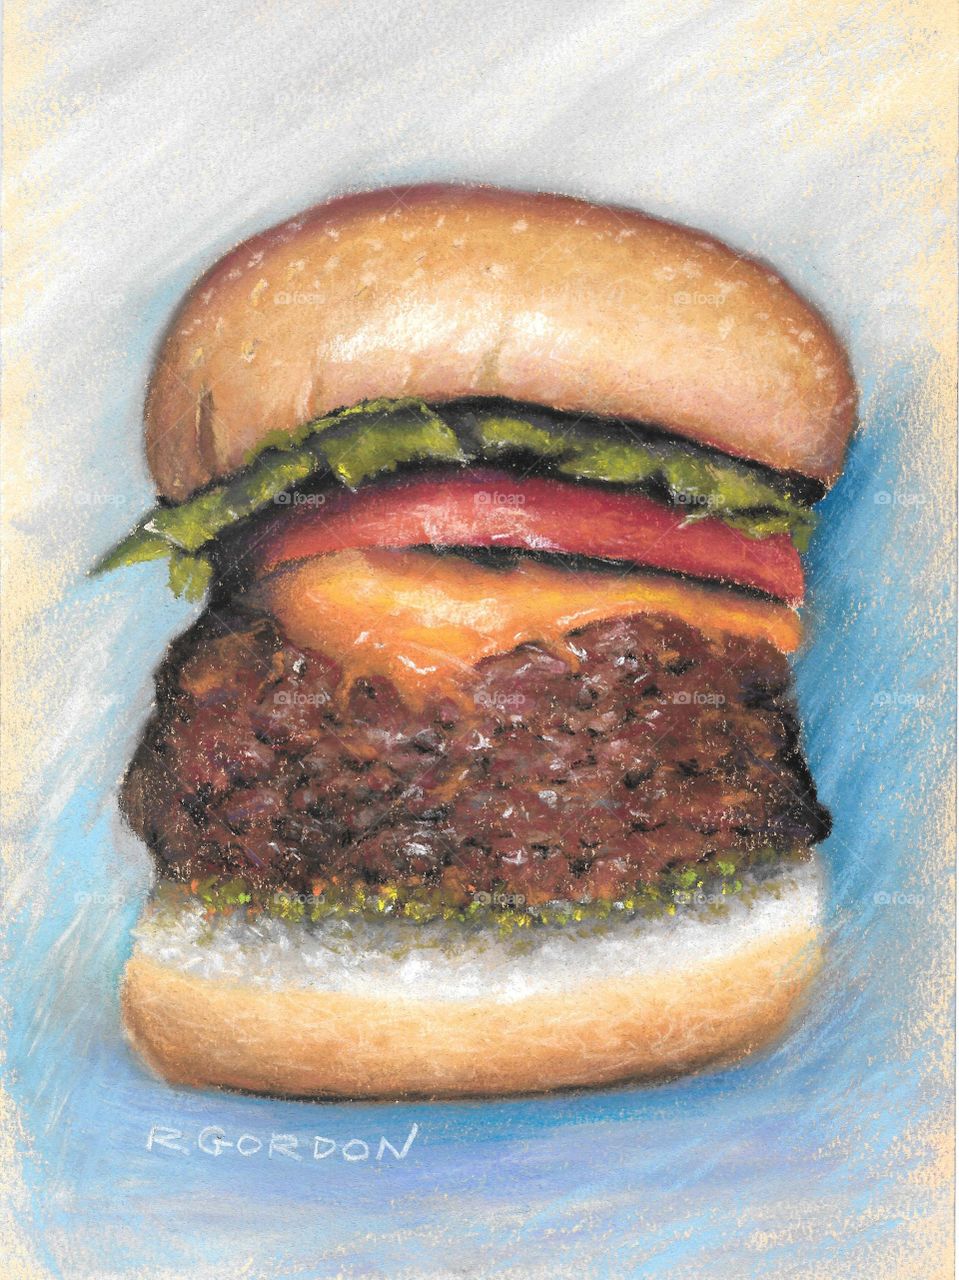 Pastel painting of a cheeseburger with onions relish mustard cheese and fresh green lettuce on a sesame seed bun done in a realistic style. Mouth watering and very moving piece of art that touches the taste buds and drives you to get a burger now!